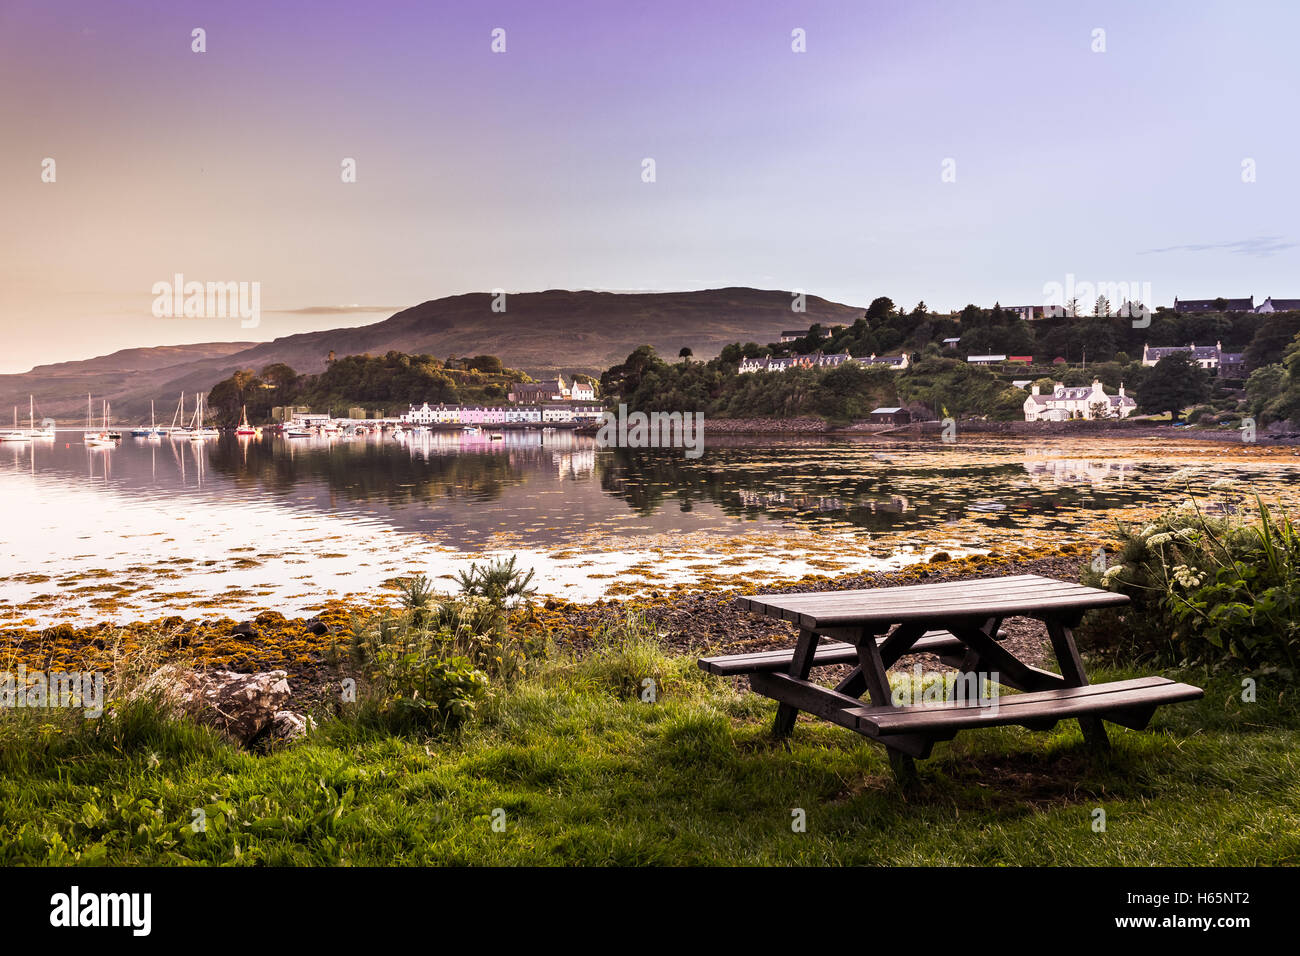 Empty Picnic Table At A Bay During Sunset With View Of Colorful Houses And Sail Boats In The Distance Stock Photo